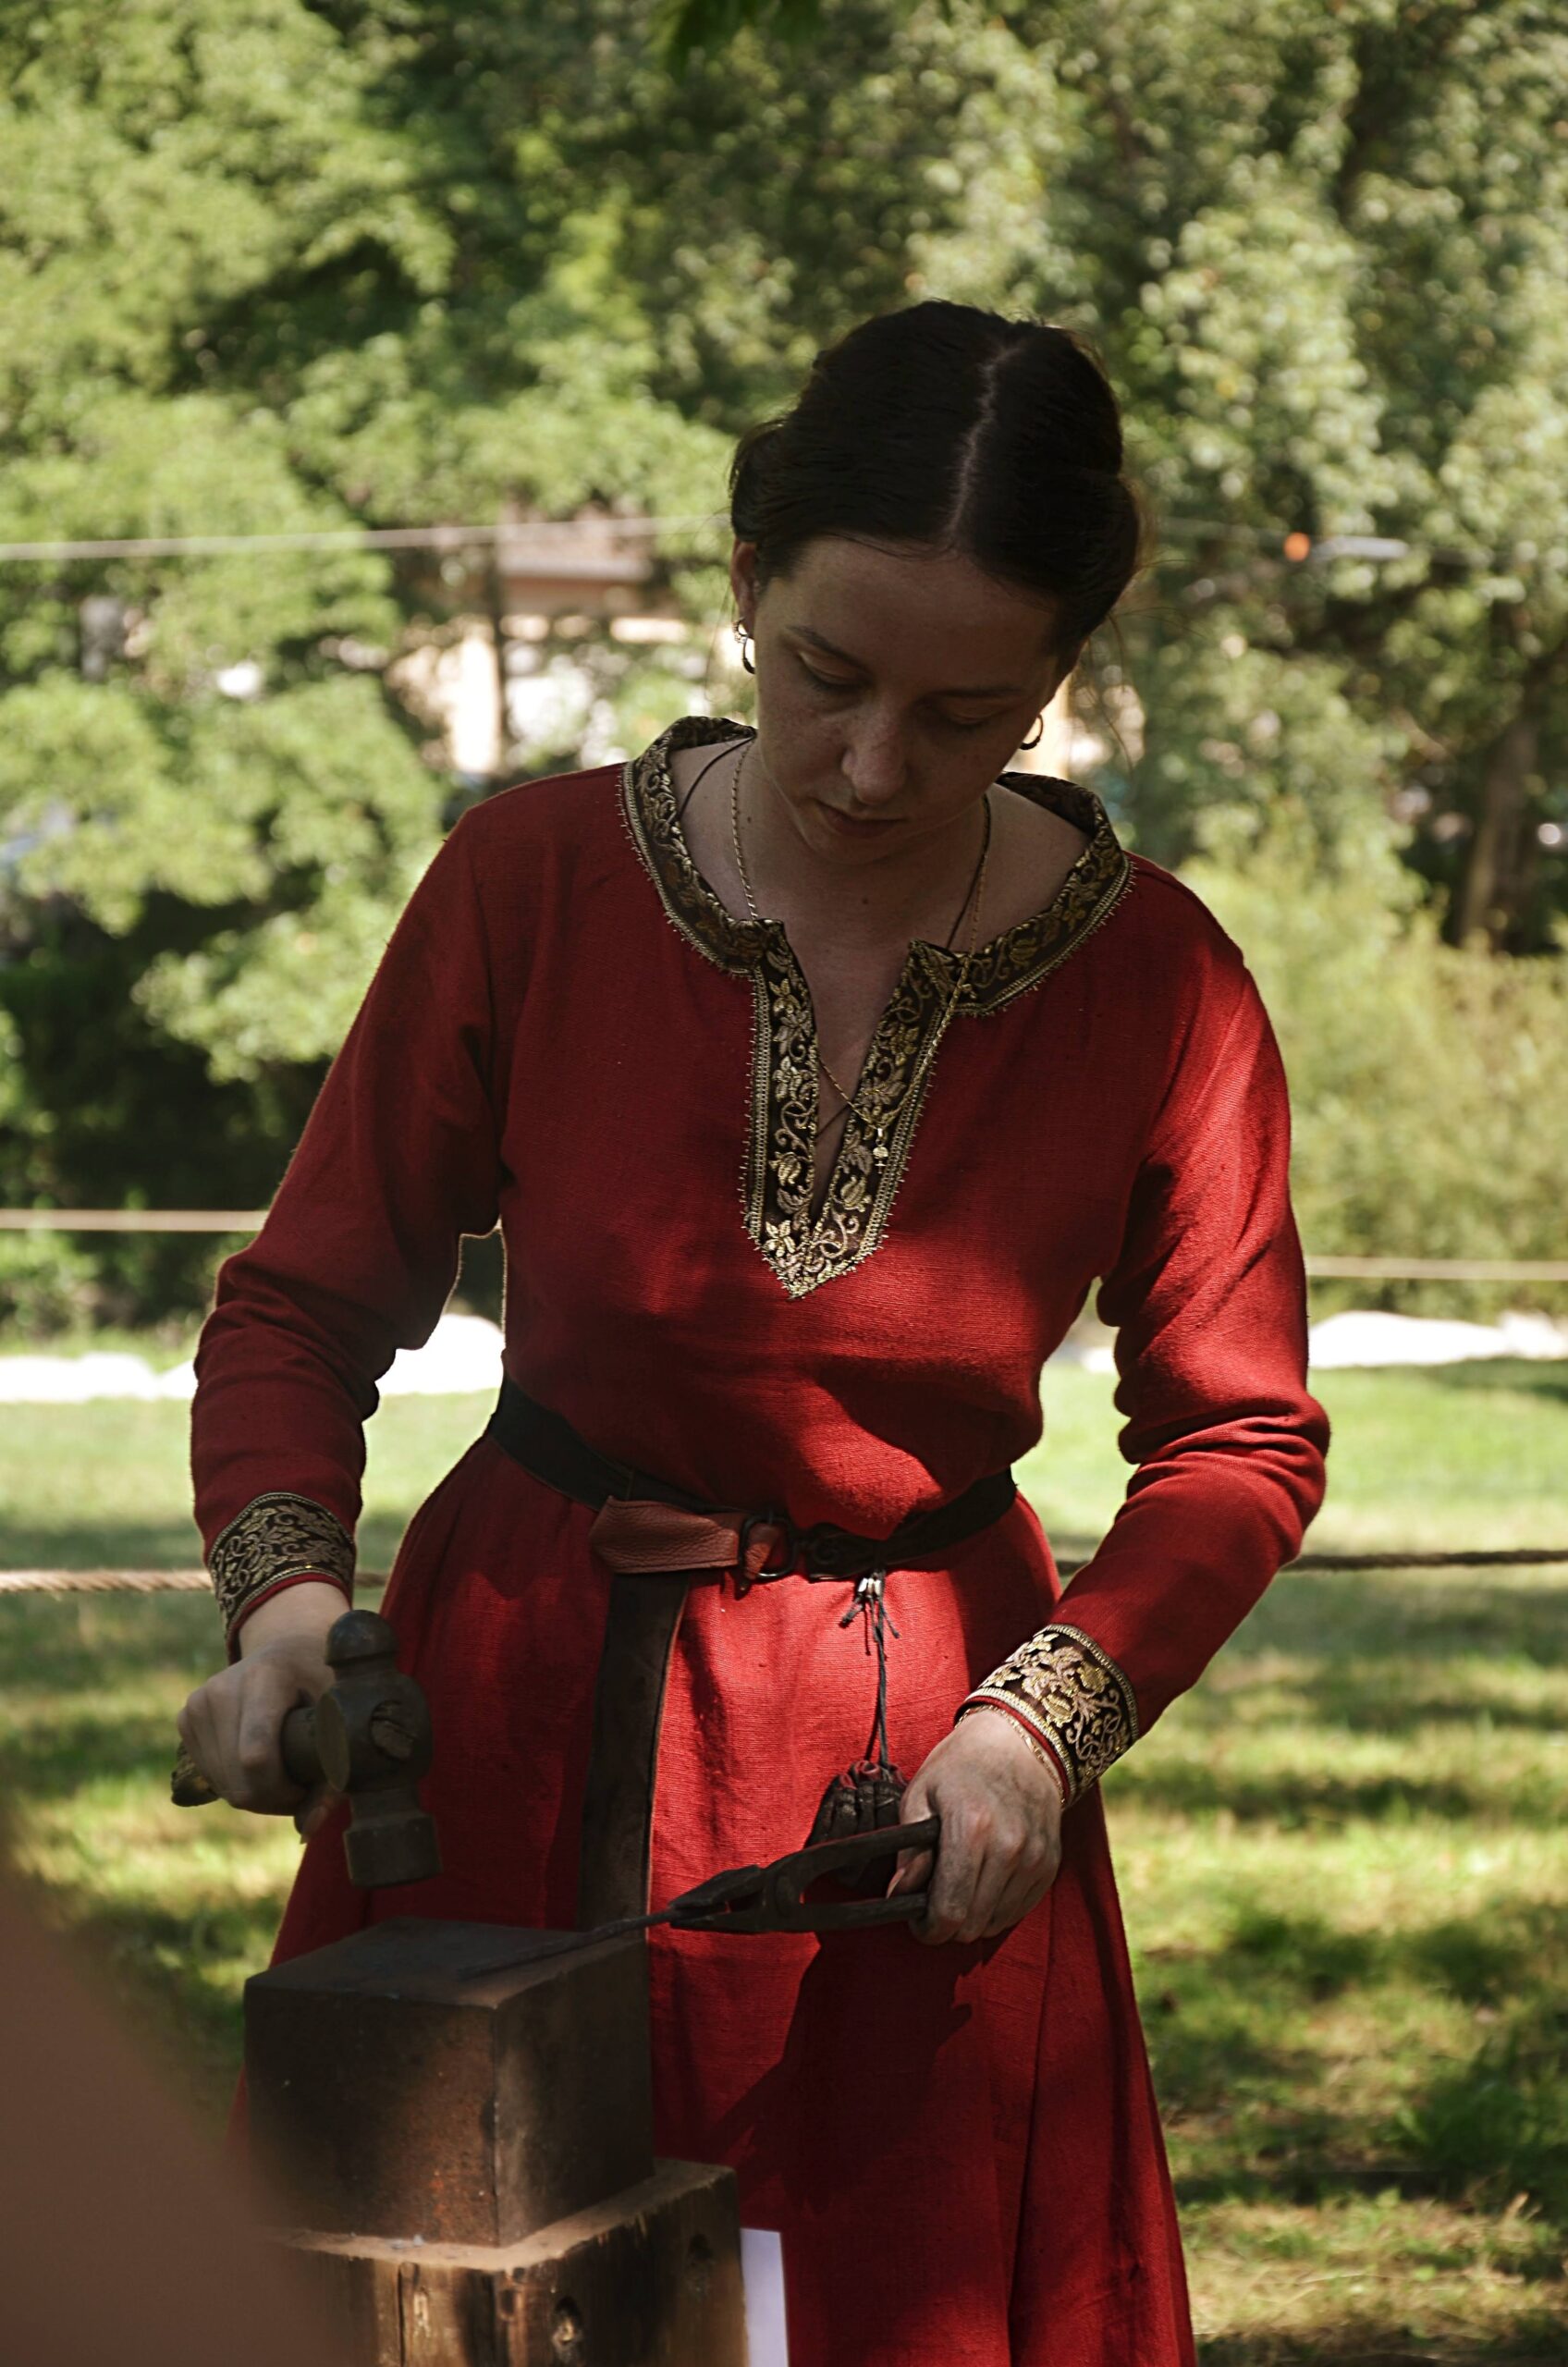 A woman in red medieval clothing holding a hammer and pliers